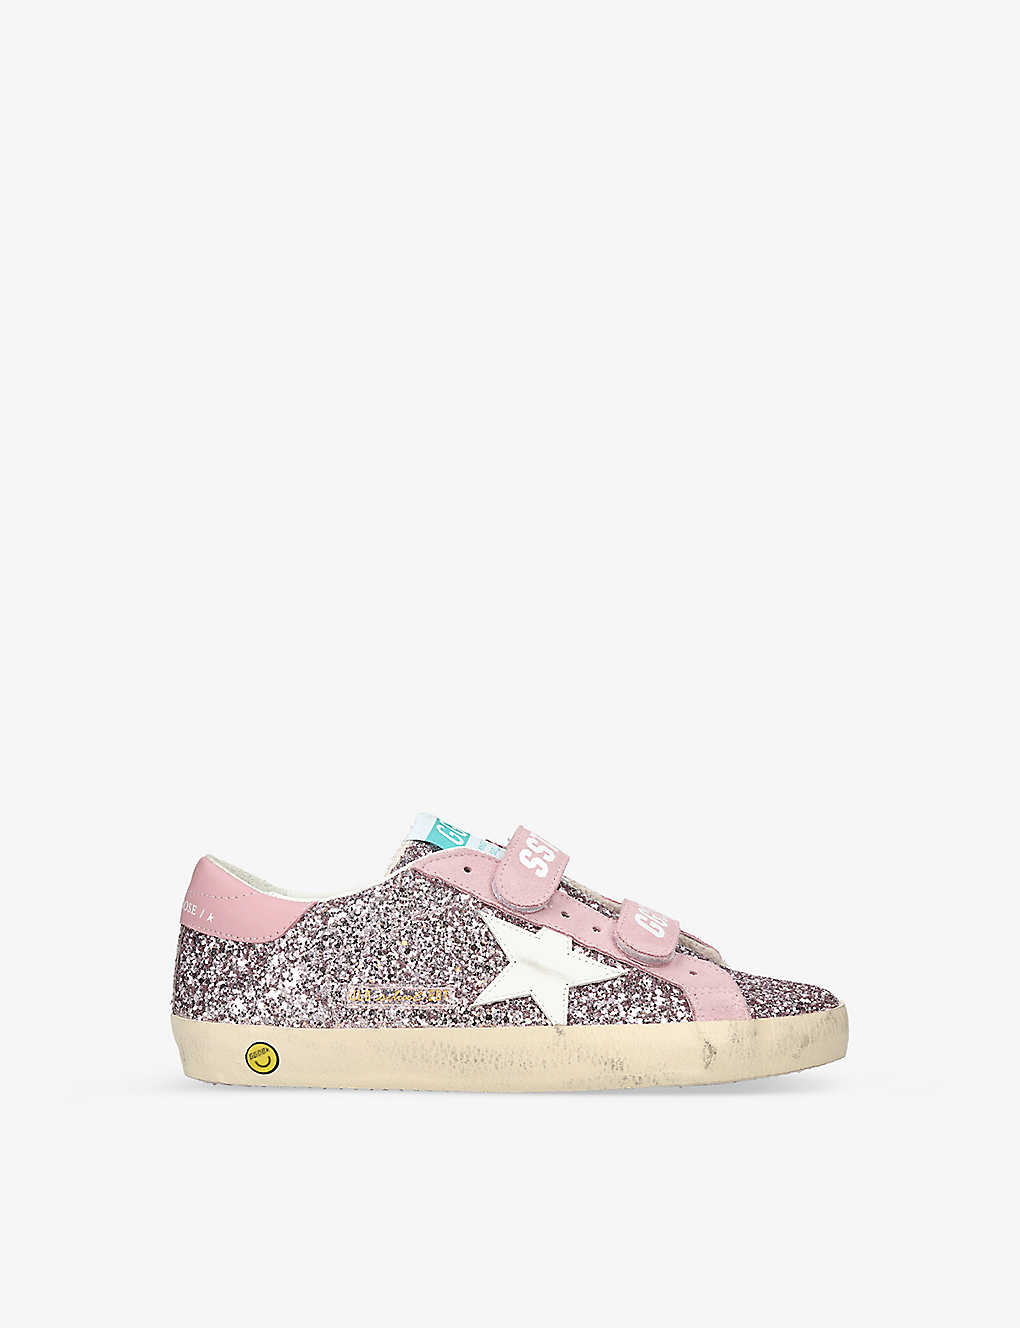 Shop Golden Goose Girls Pink Kids Old School Glitter And Leather Low-top Trainers 6-9 Years